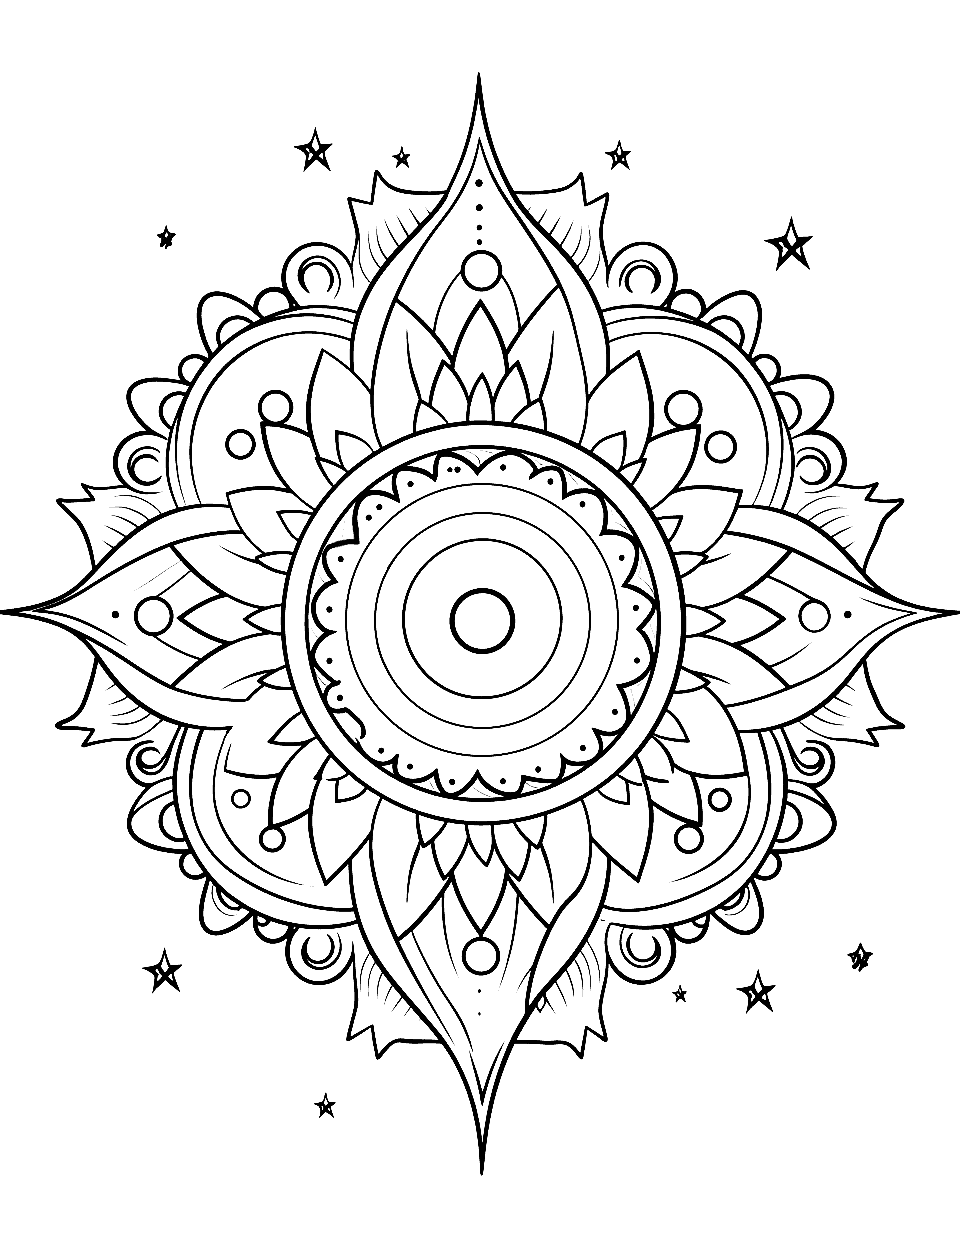 Mystical Moon Mandala Coloring Page - A beautiful, detailed mandala with a large, ornate moon at its center, surrounded by stars.